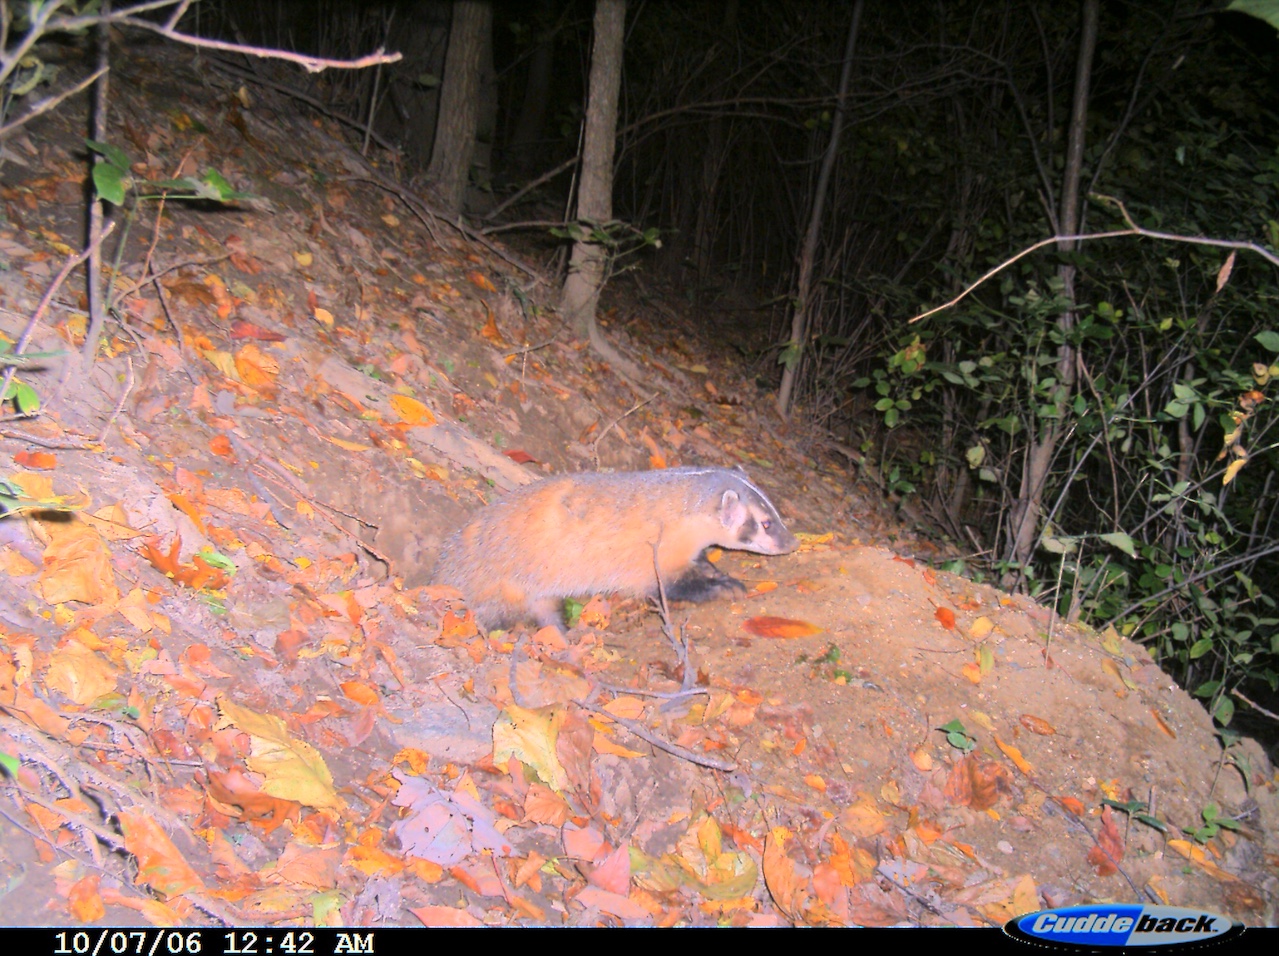 A badger caught coming out of its burrow by a trail camera.